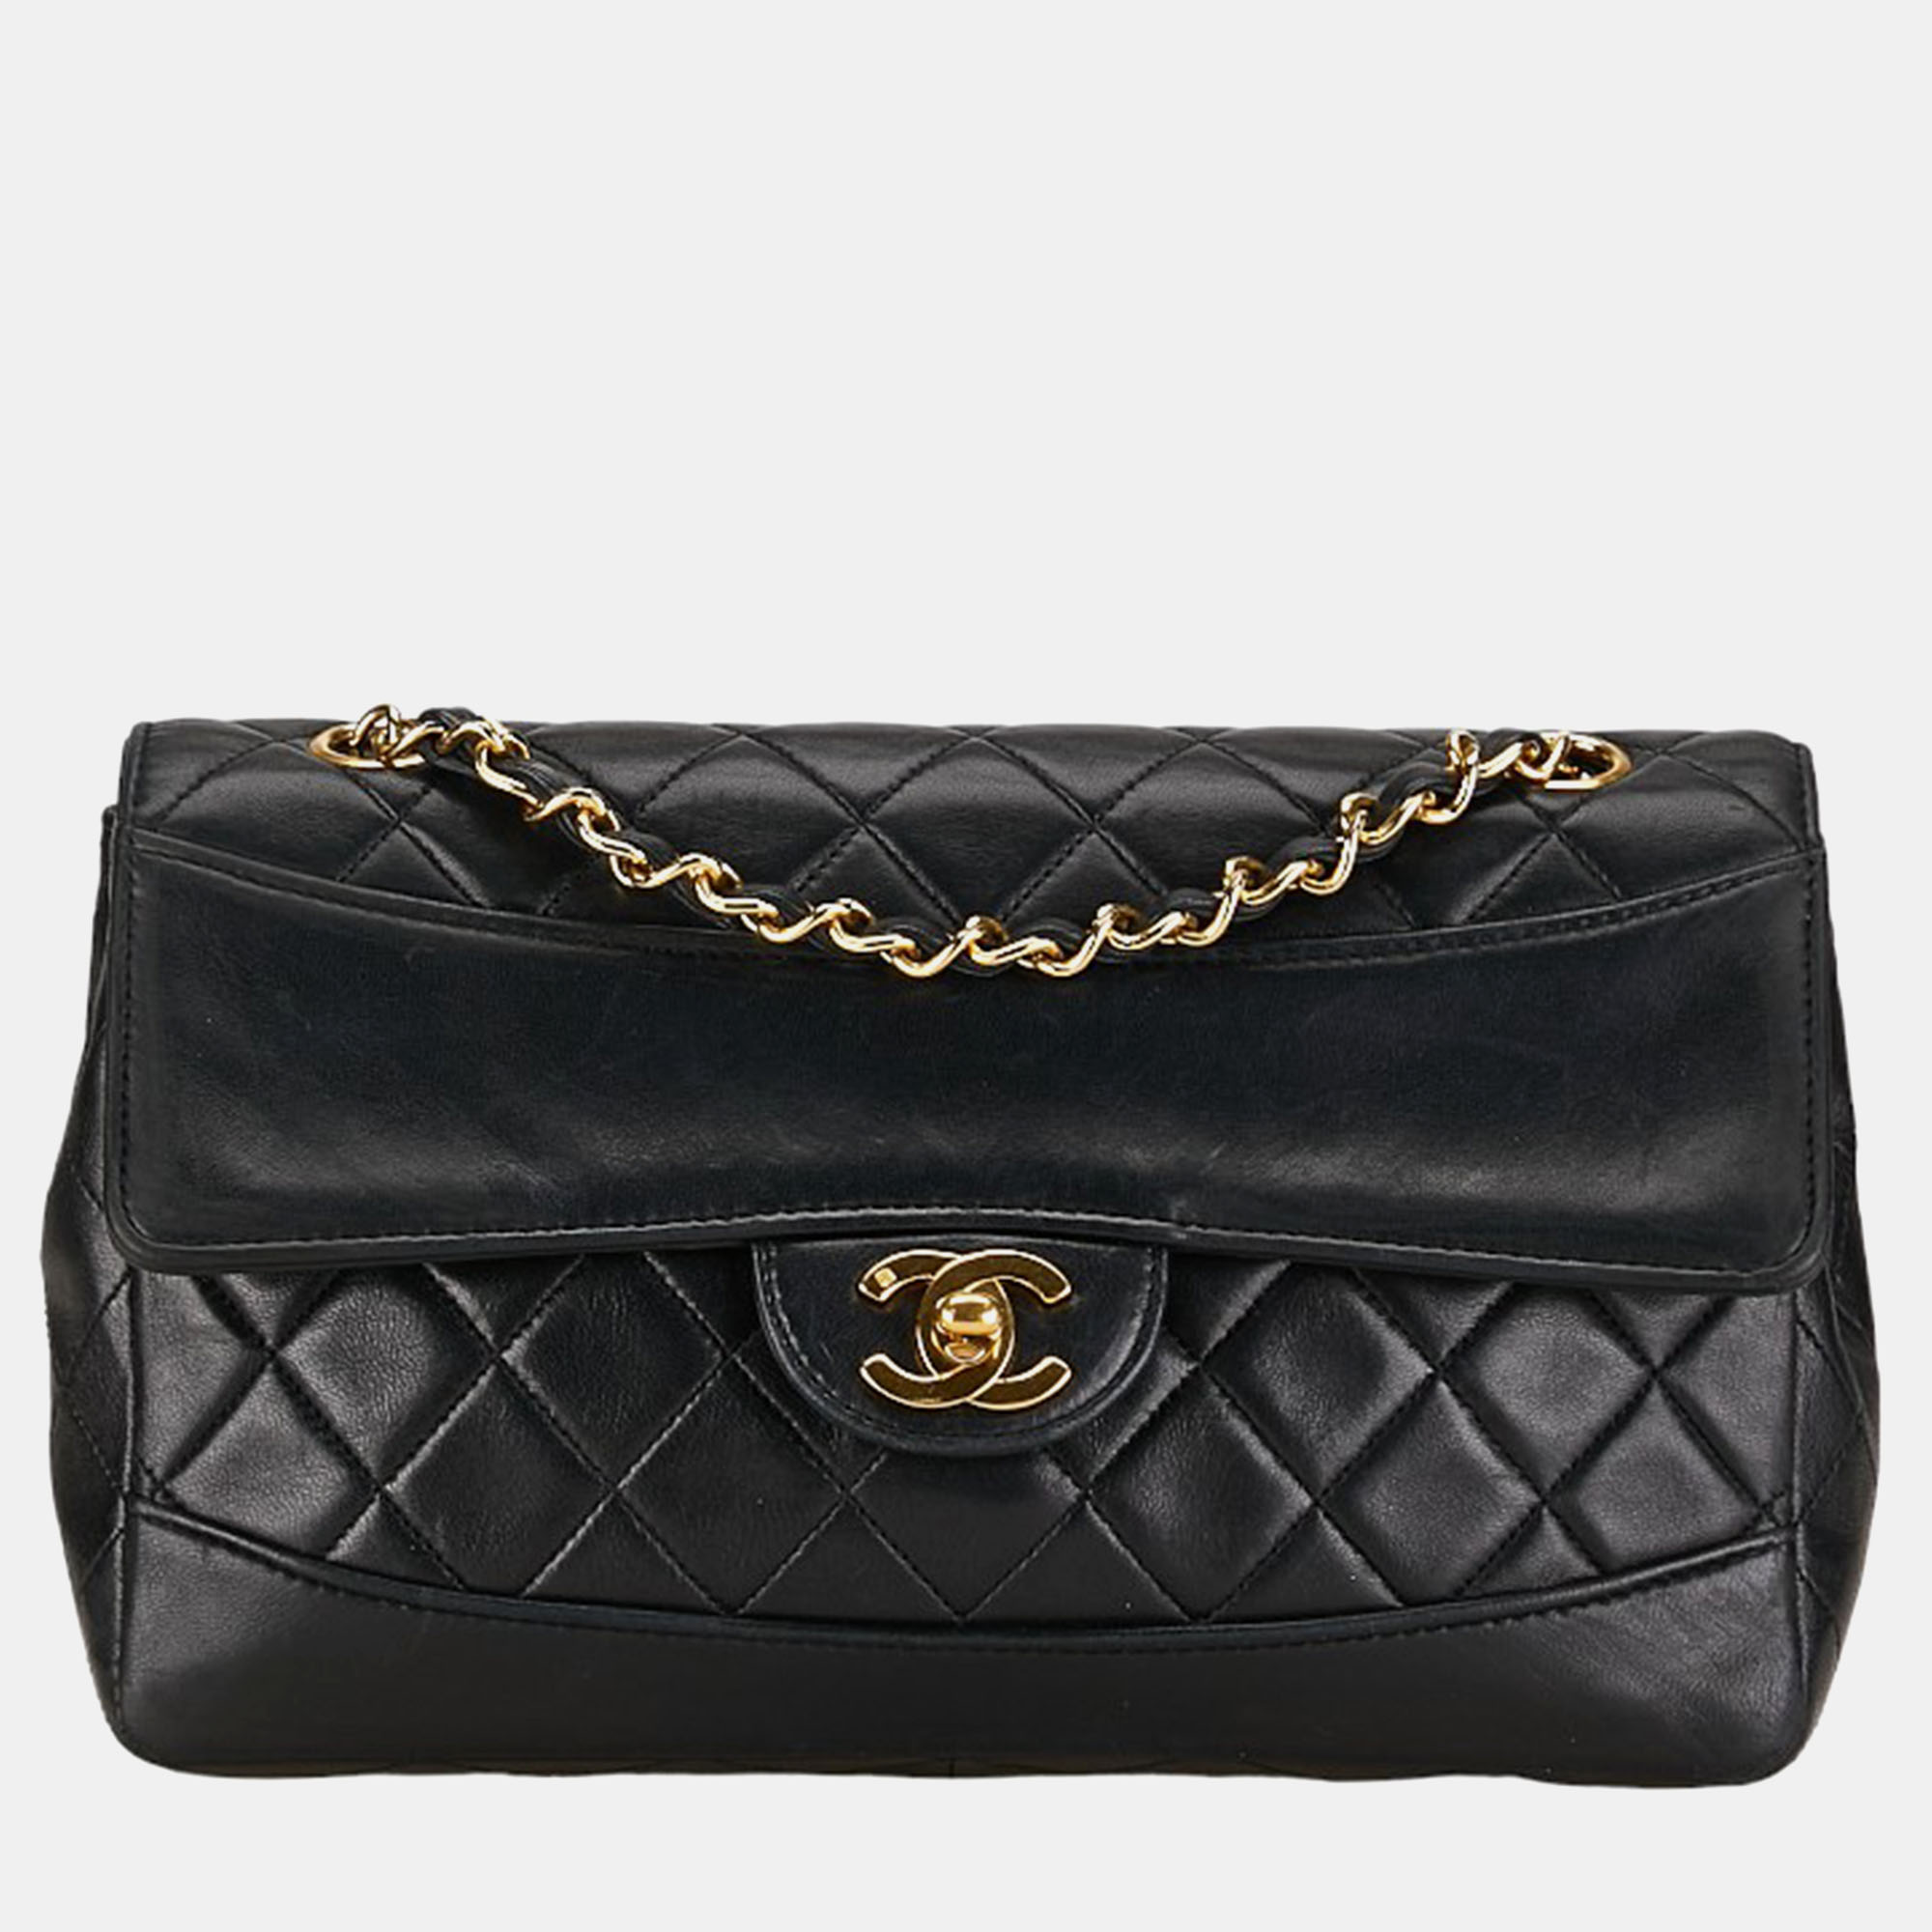 Pre-owned Chanel Black Quilted Lambskin Medium Vintage Cc Chain Flap Bag